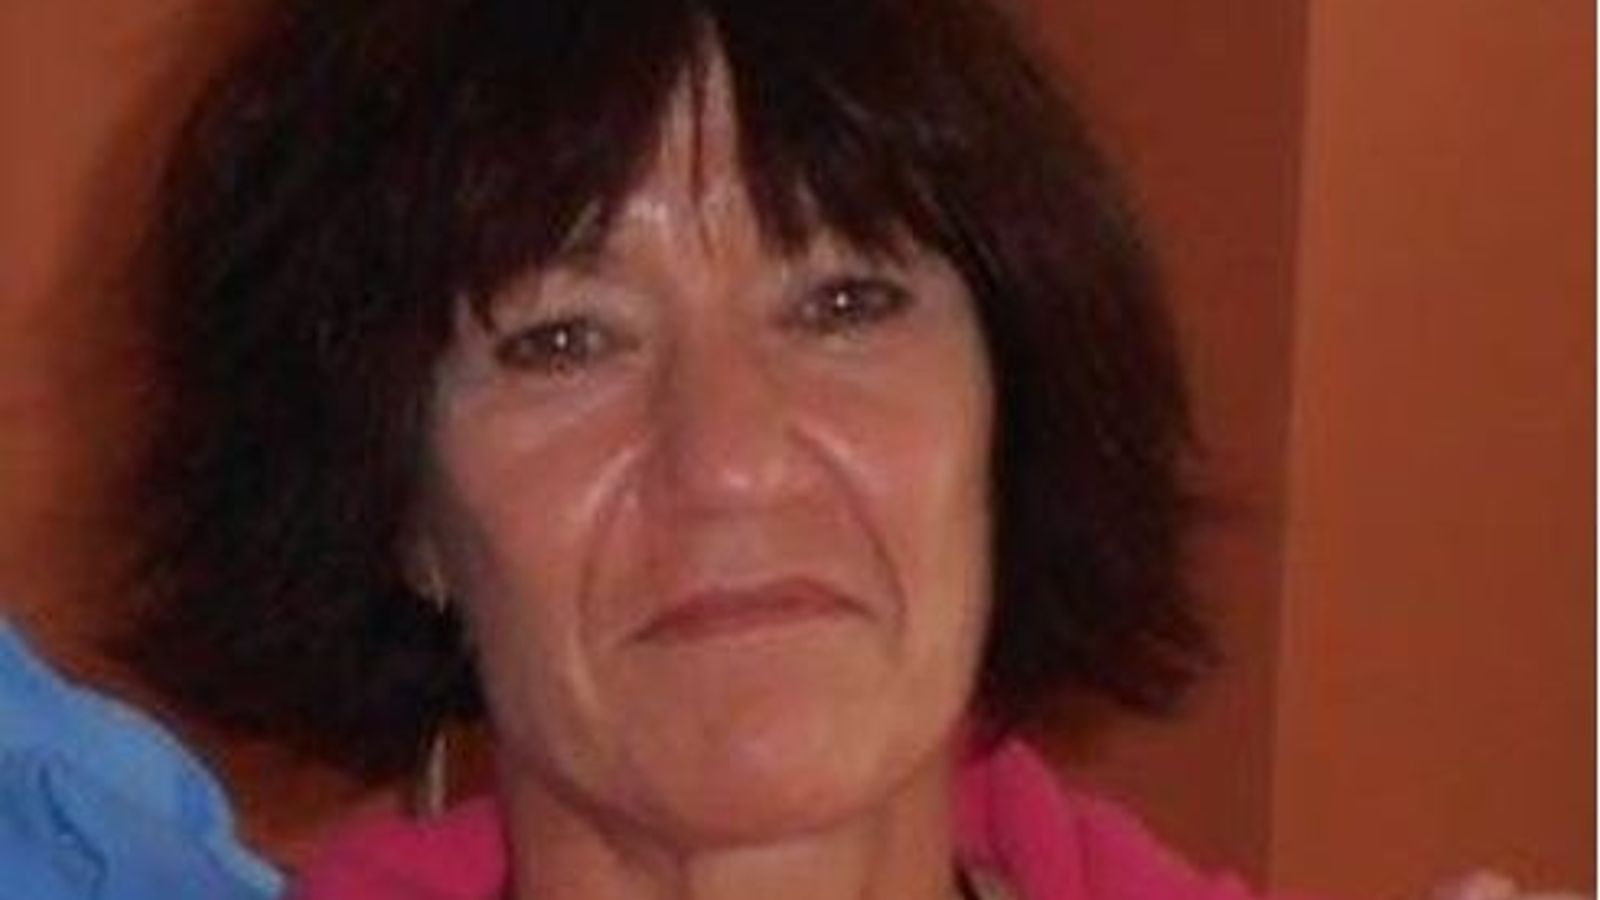 Norfolk No Body Murder Investigation Man Arrested In Wales After Disappearance Of Woman Uk